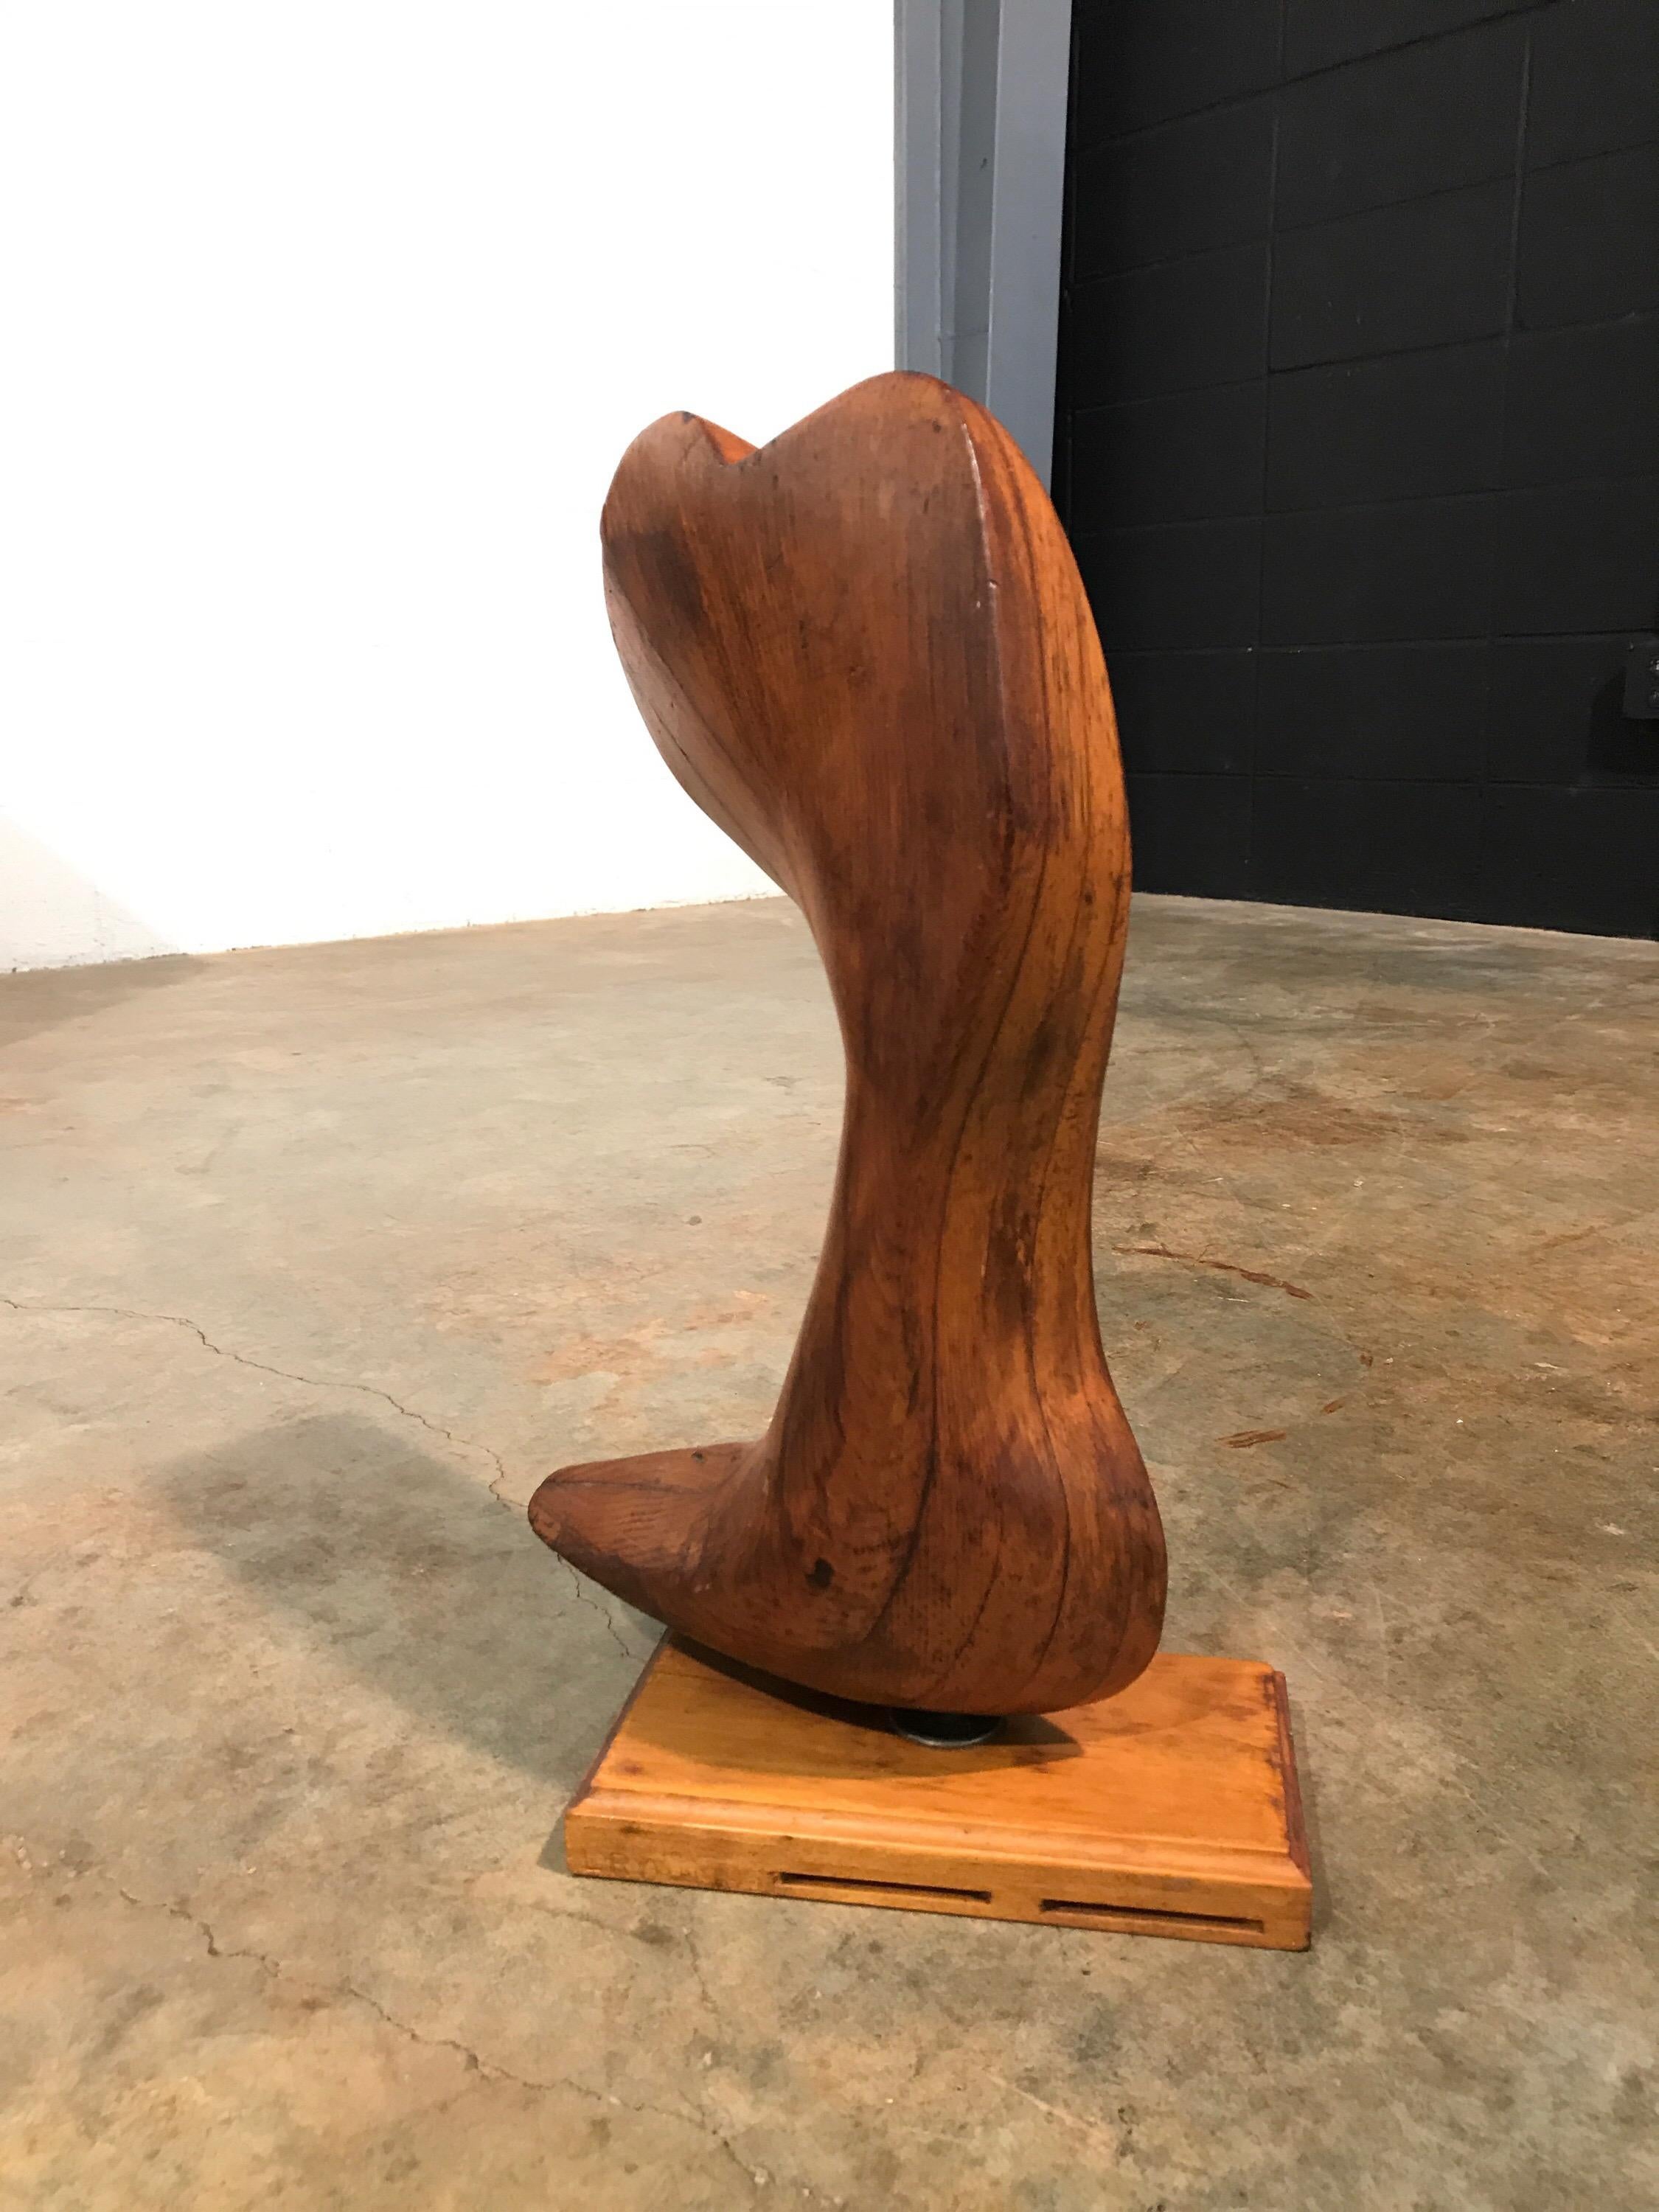 Mid-20th Century Early Modern Wood Sculpture Artist Signed L Ryan 1951, Rogue Wave, Vintage For Sale